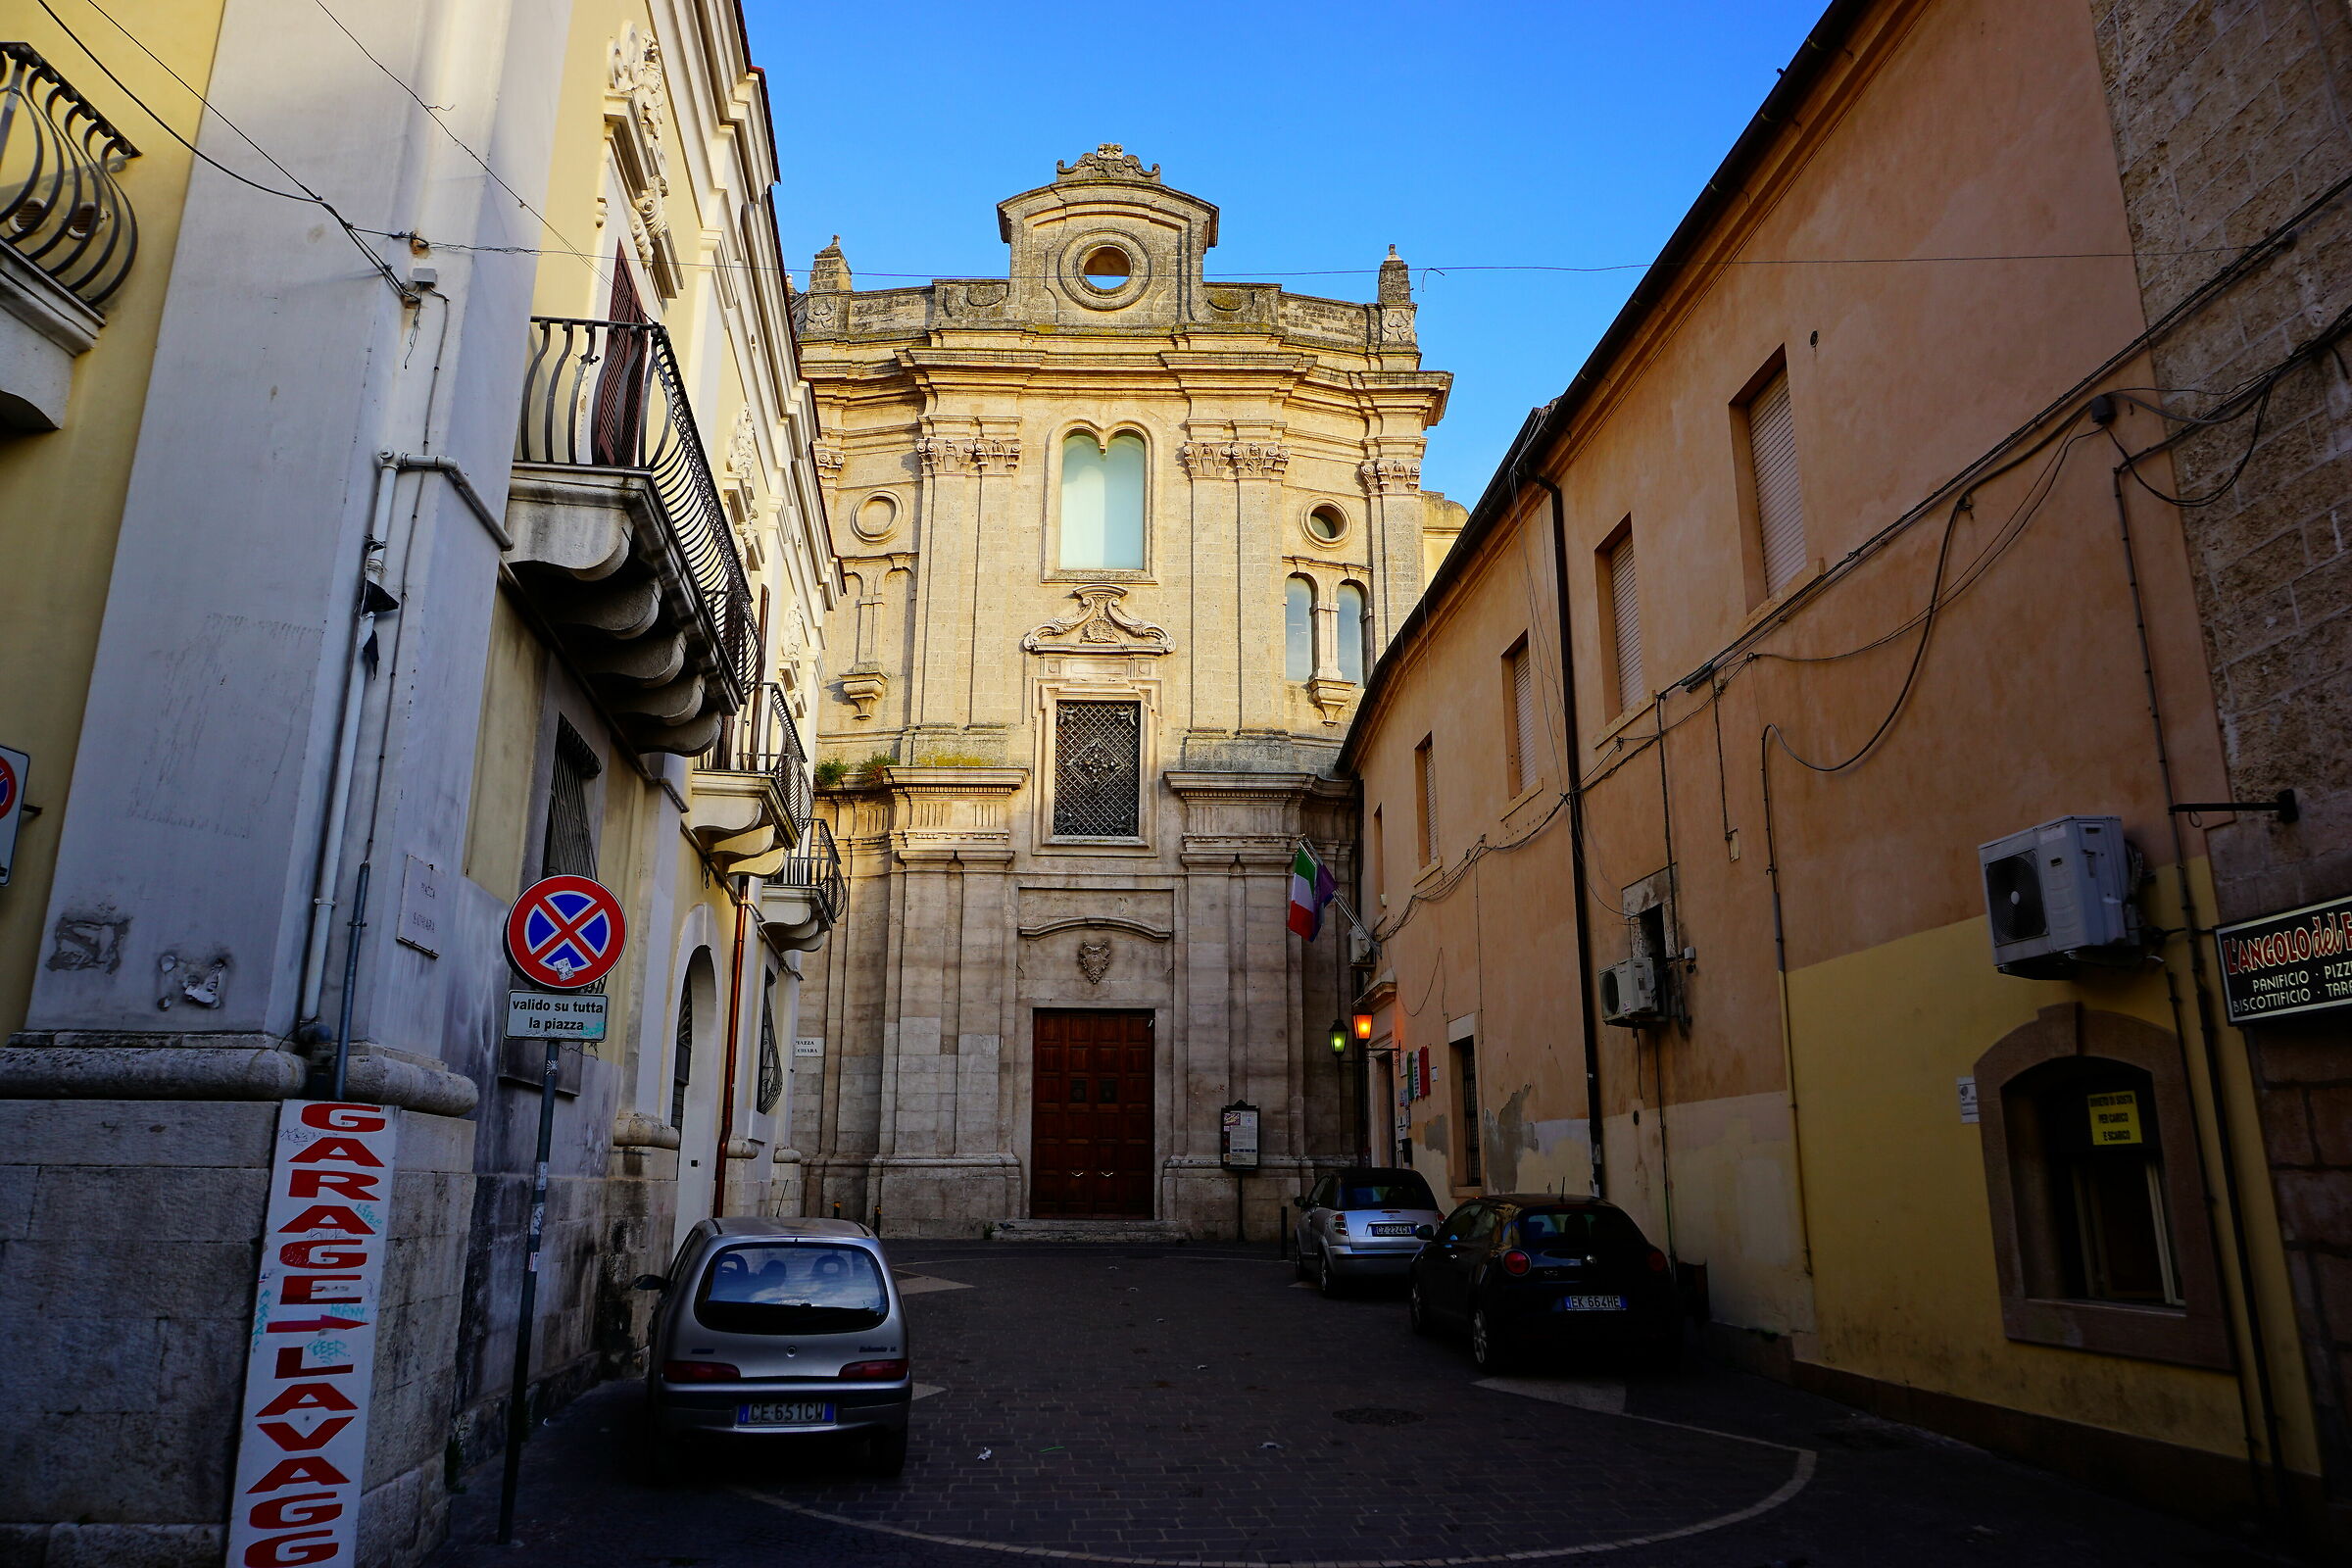 There is no more room for religion, Foggia...